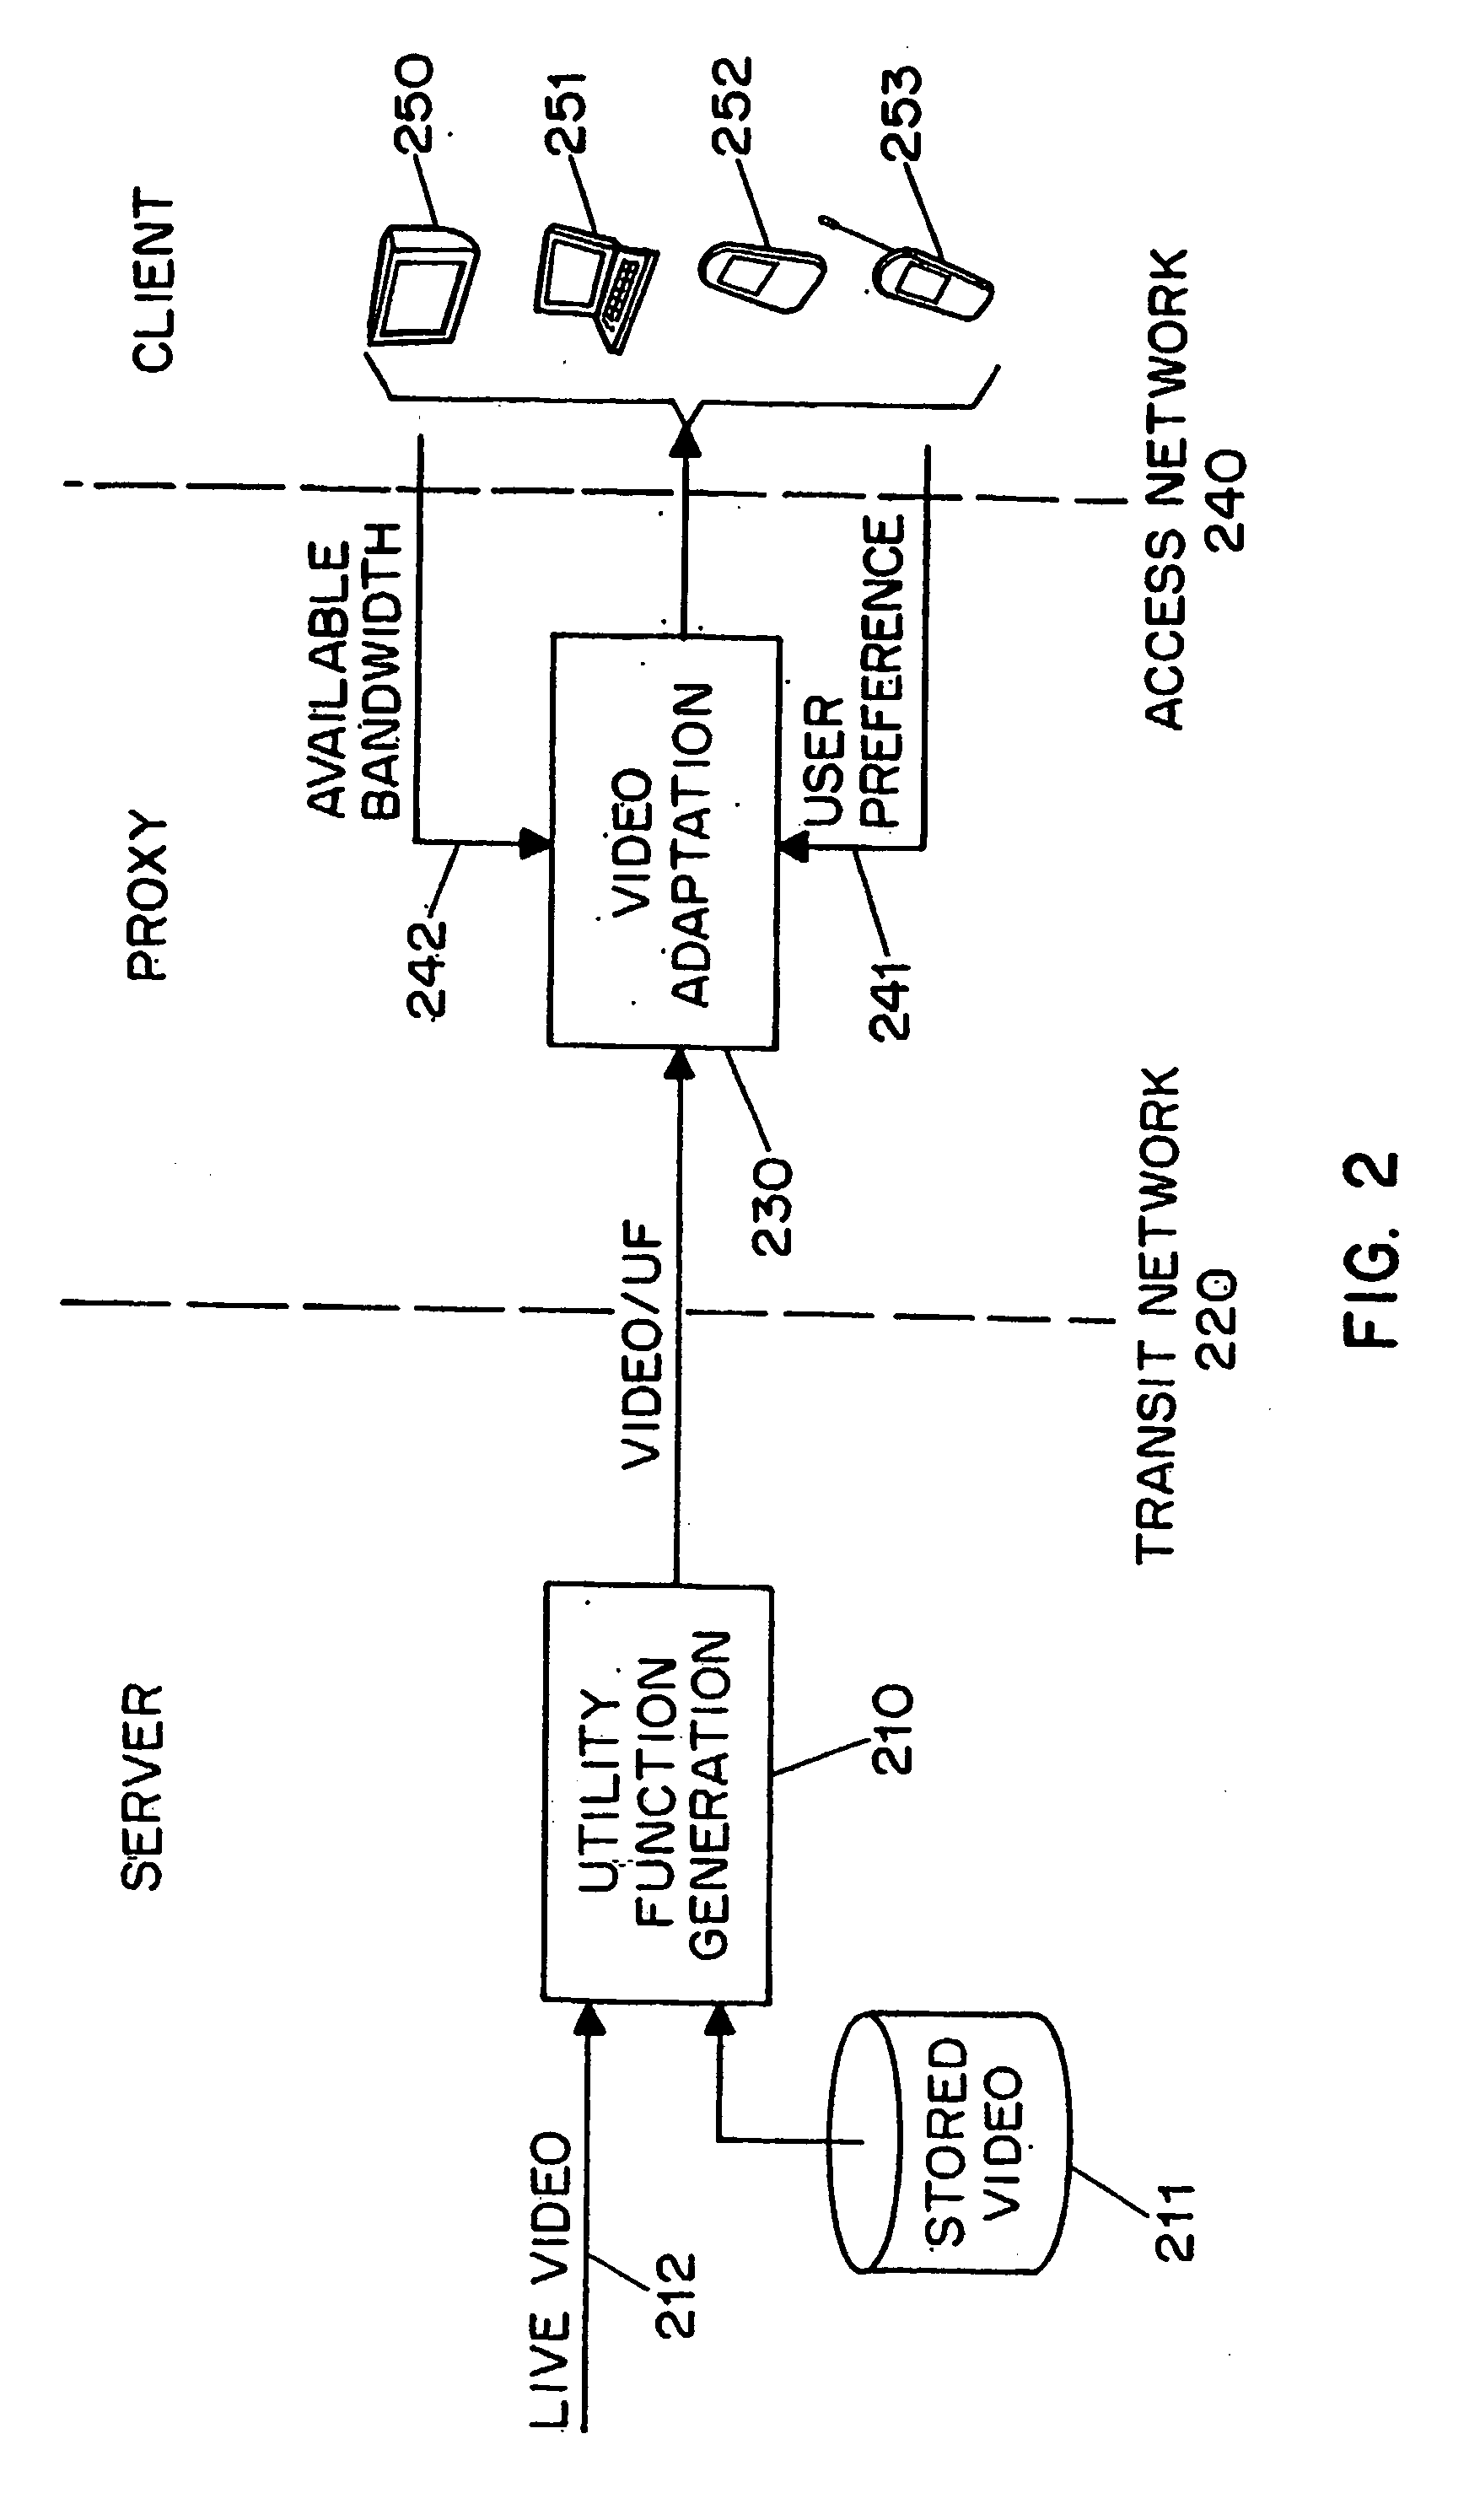 Method and system for optimal video transcoding based on utility function descriptors